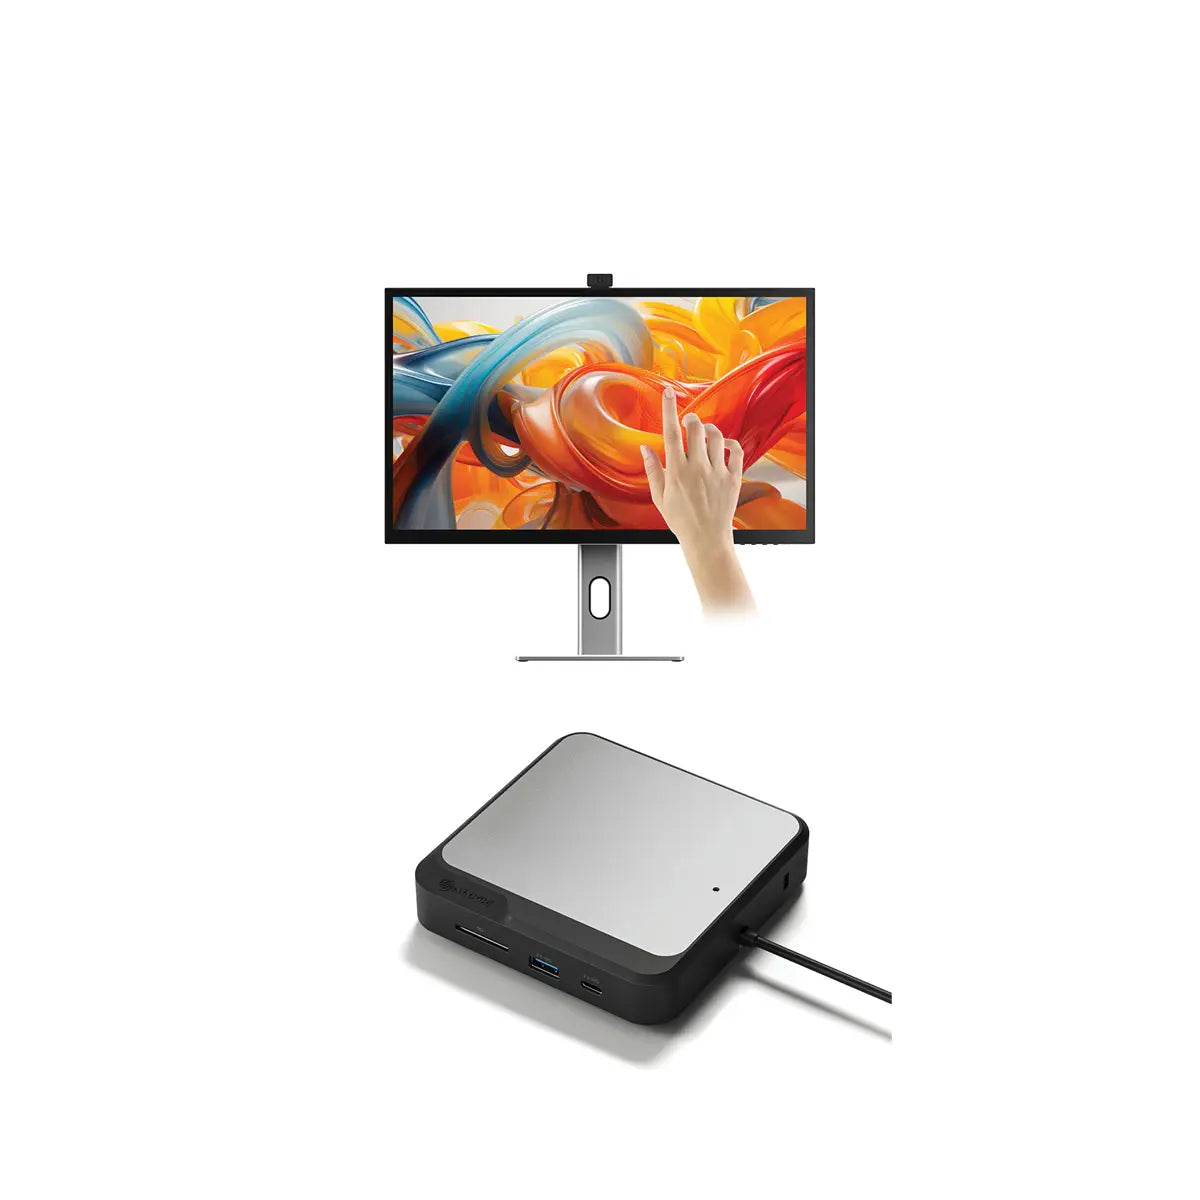 clarity-pro-touch-27-uhd-4k-monitor-with-65w-pd-webcam-and-touchscreen-dual-4k-universal-docking-station-displayport-edition1